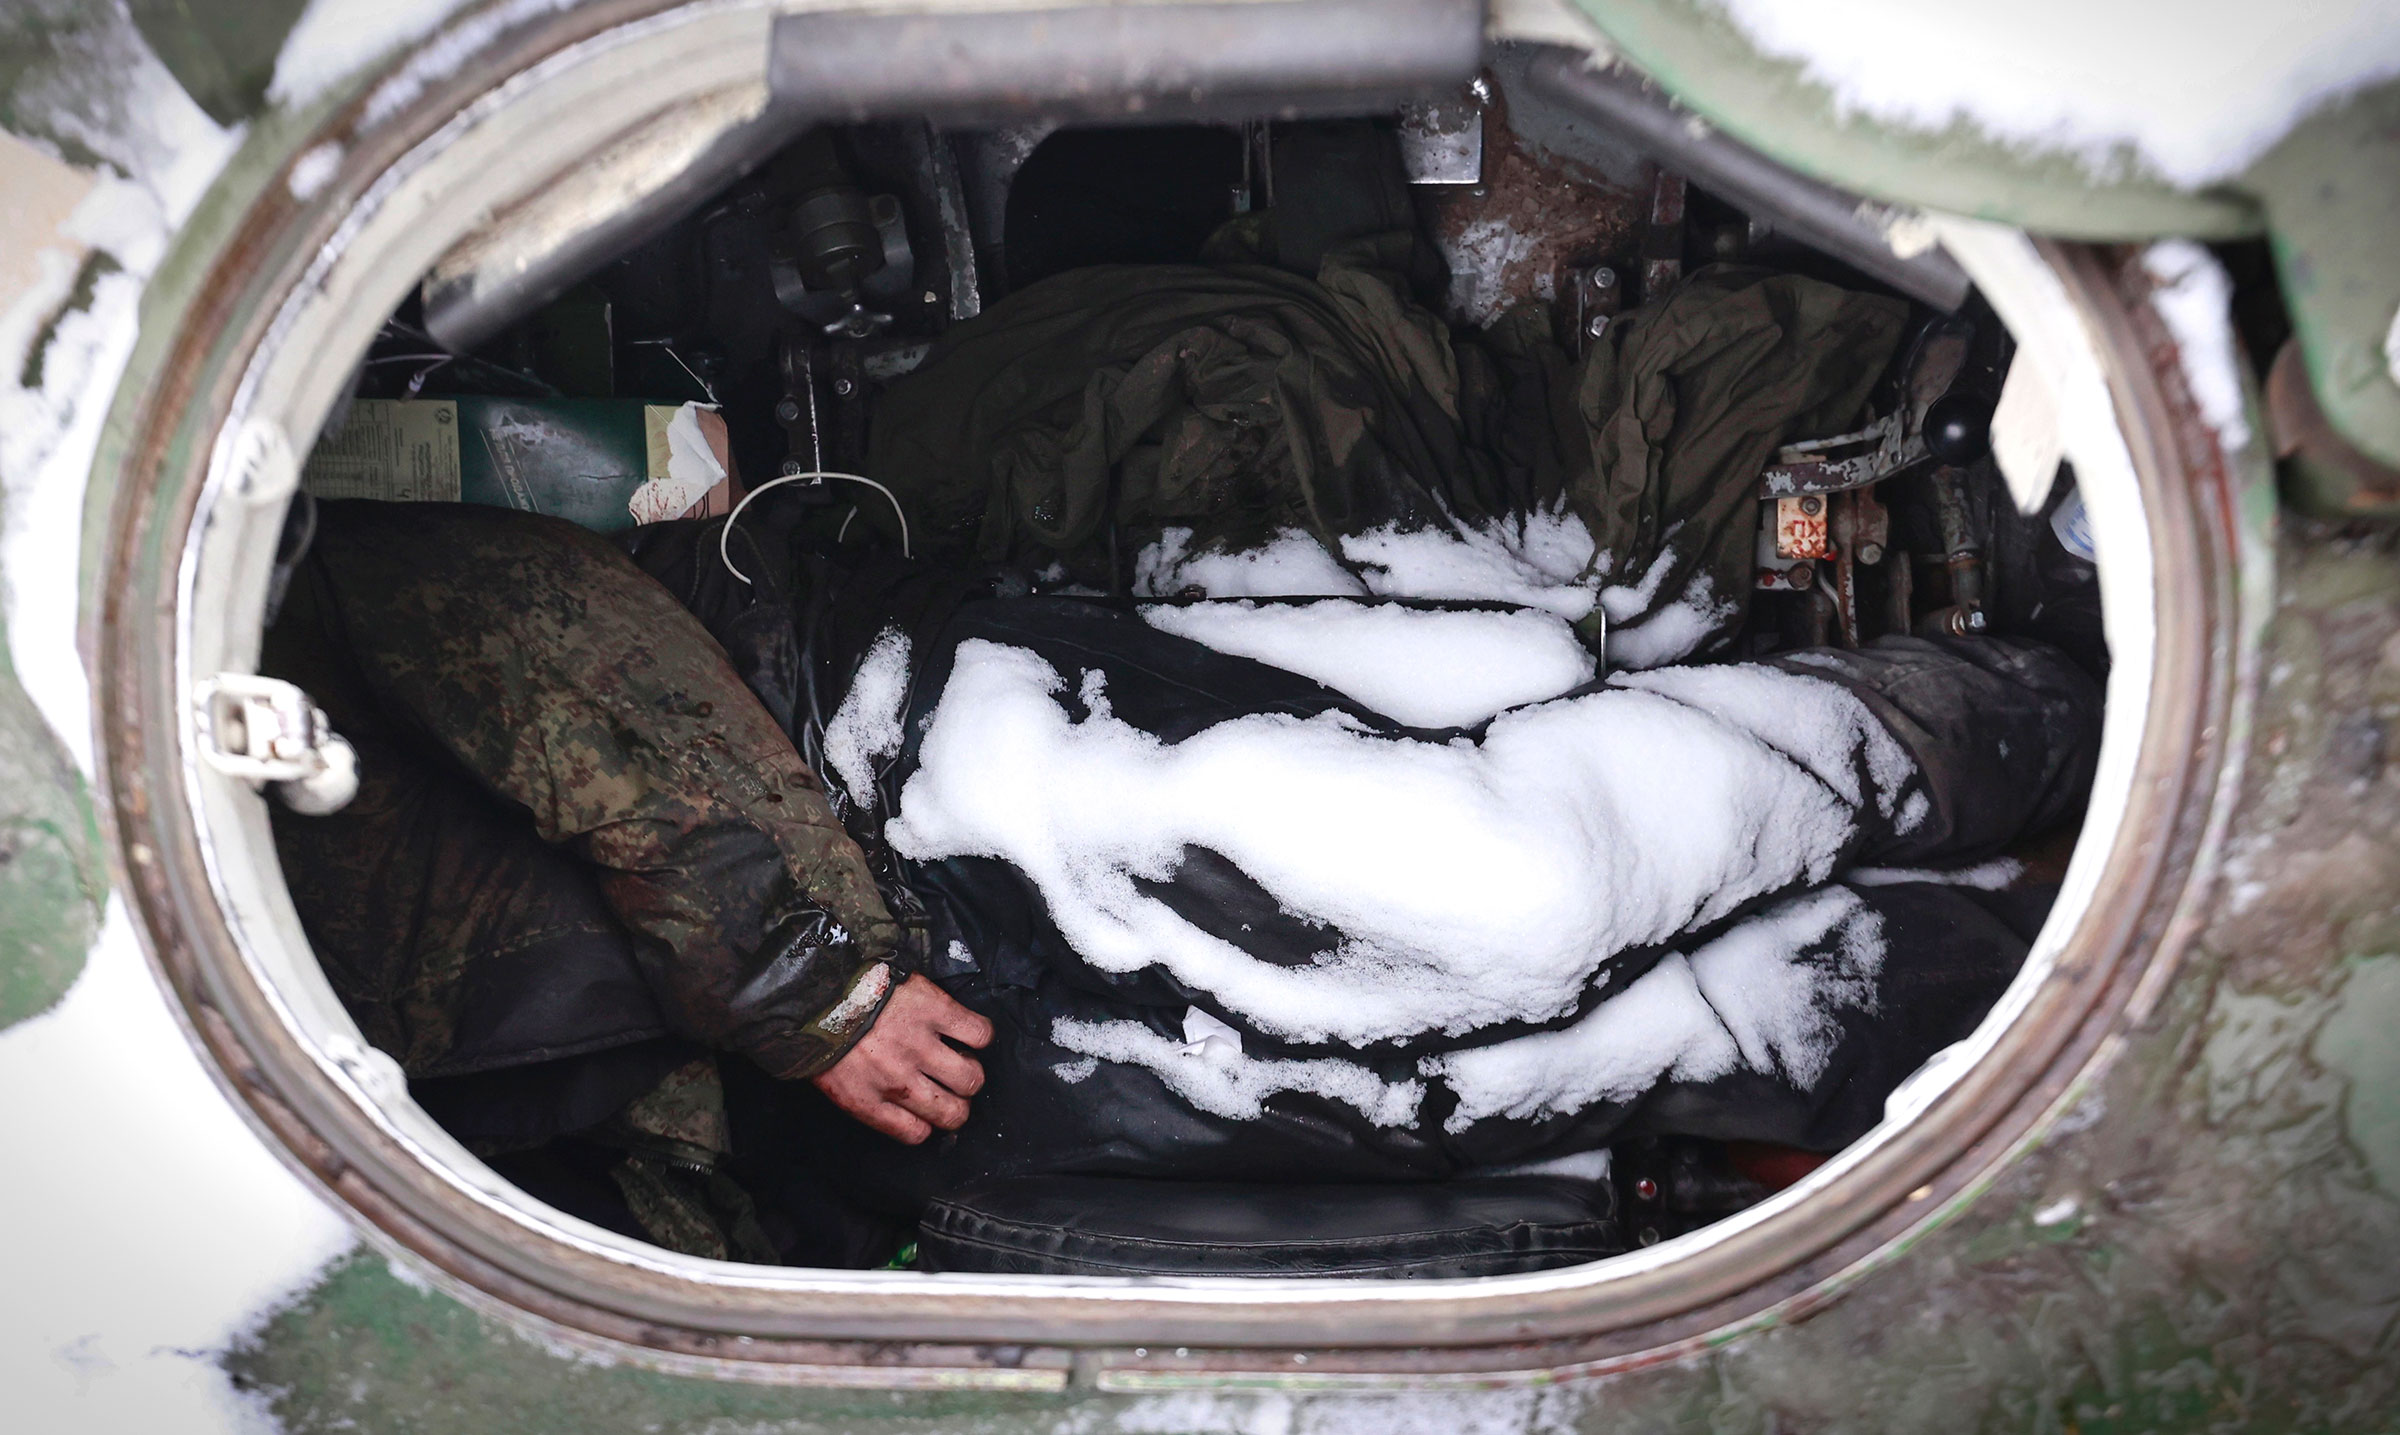 The dead bodies of soldiers are seen in a military vehicle on a road in the town of Bucha, close to the capital Kyiv, Ukraine, on March 1. (Serhii Nuzhnenko—AP)